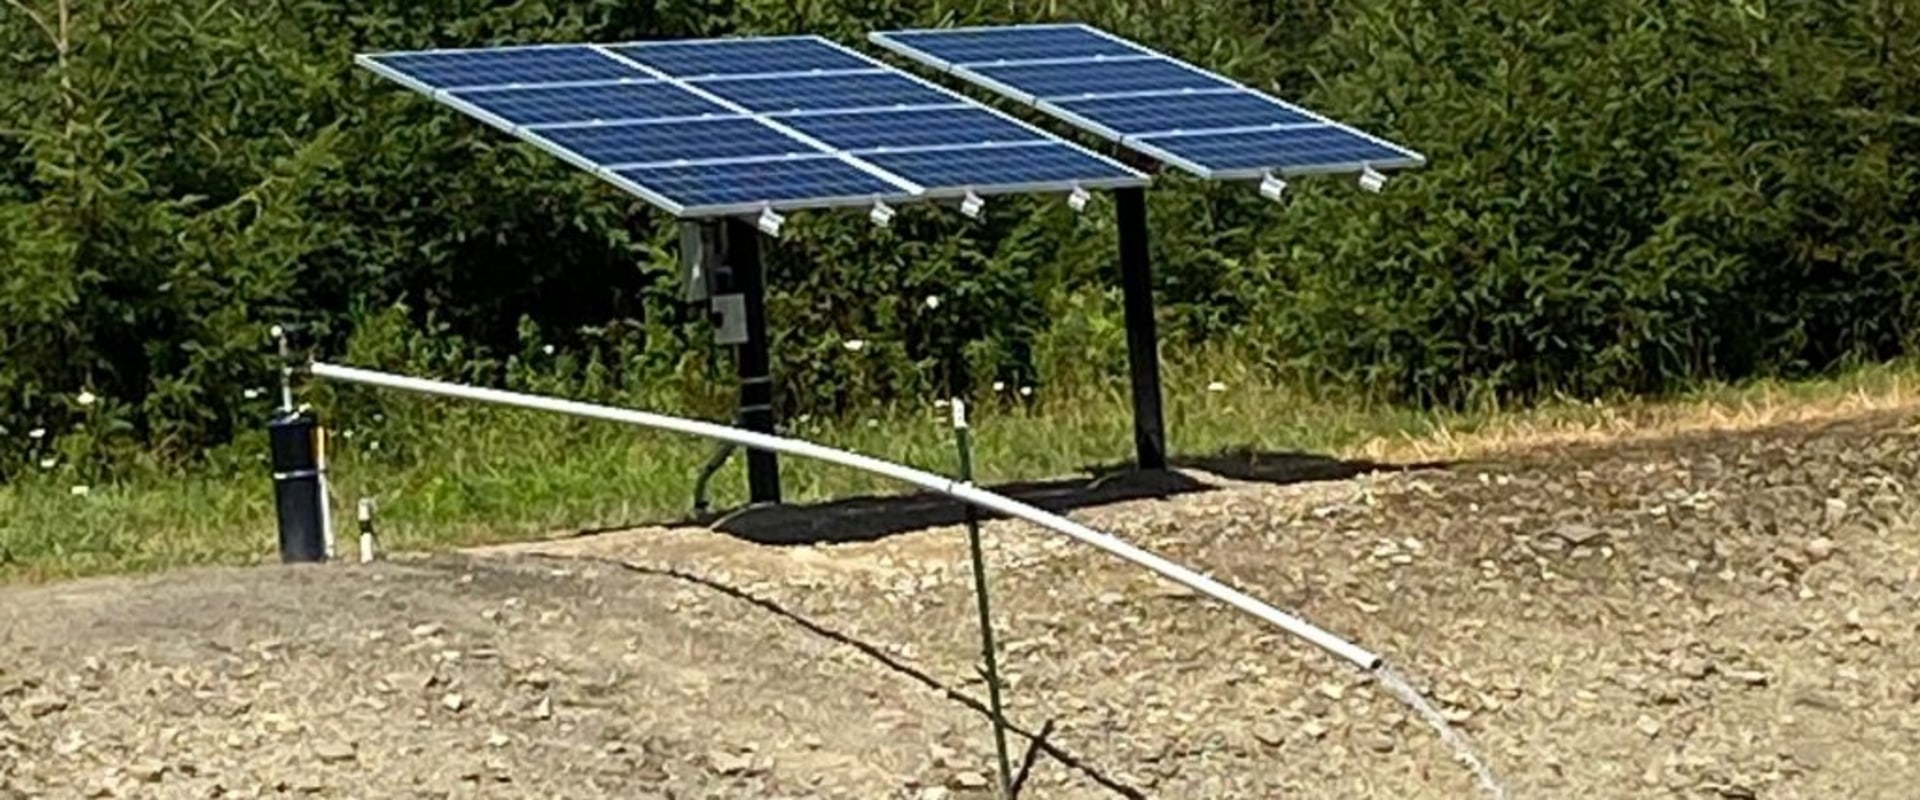 What Can a 400 Watt Solar Panel Charge?